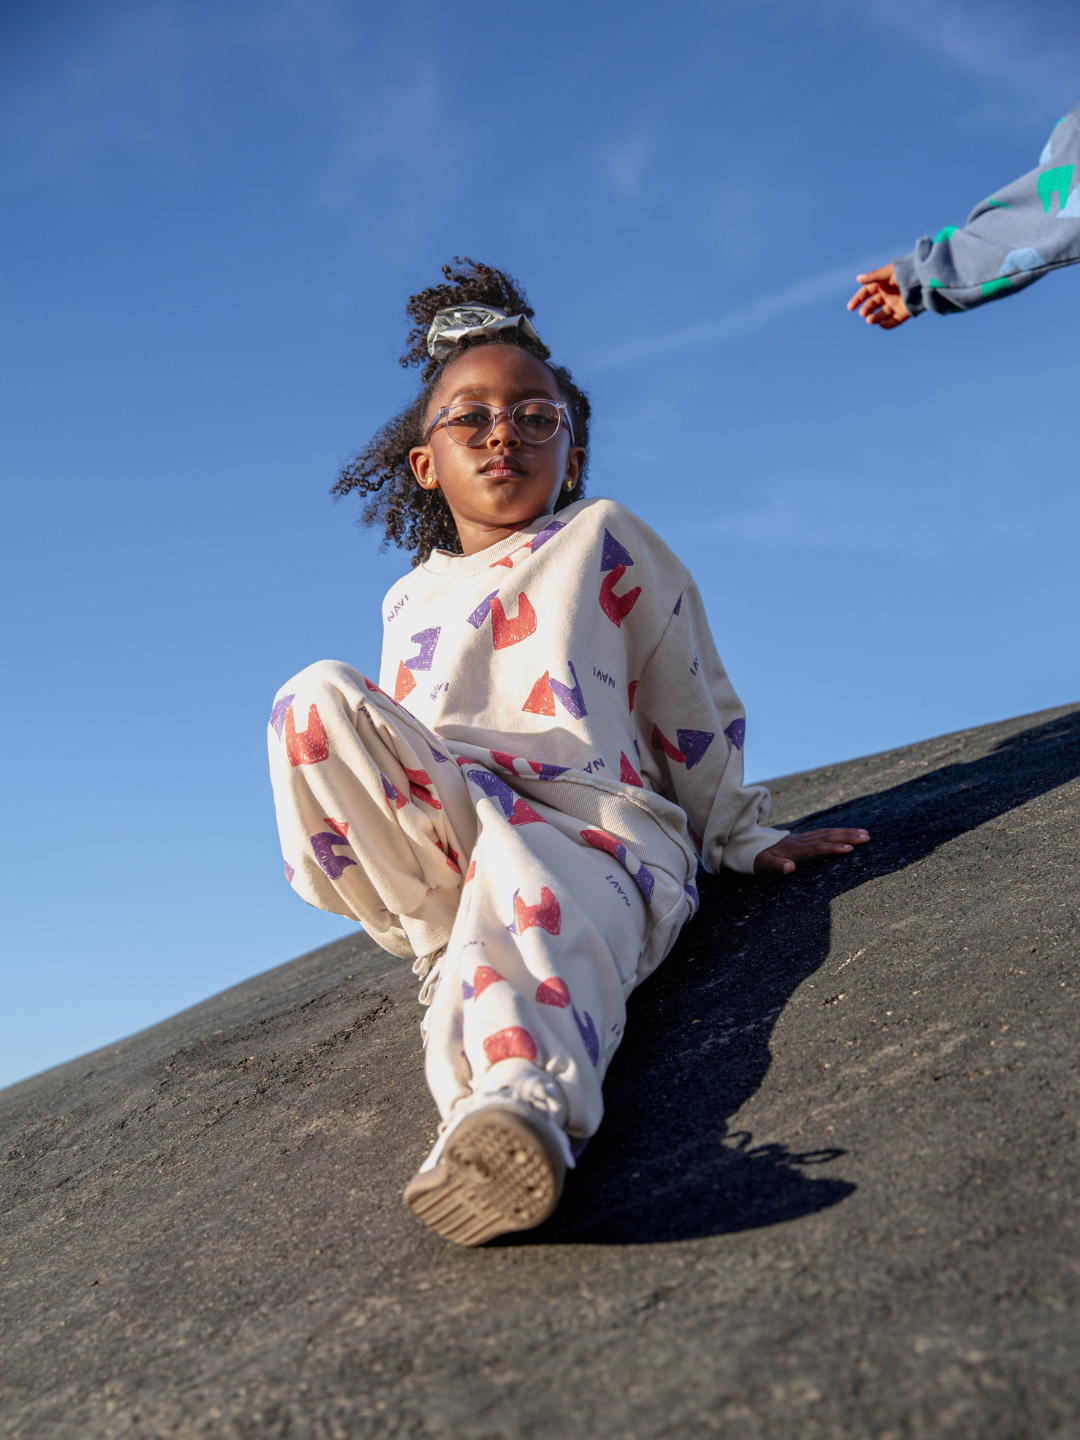 Oatmeal | Child wearing beige sweatpants with an all over pattern of red and purple shapes and the brand name Navi, with matching crewneck sweatshirt. She sits on a concrete hill with blue sky above.